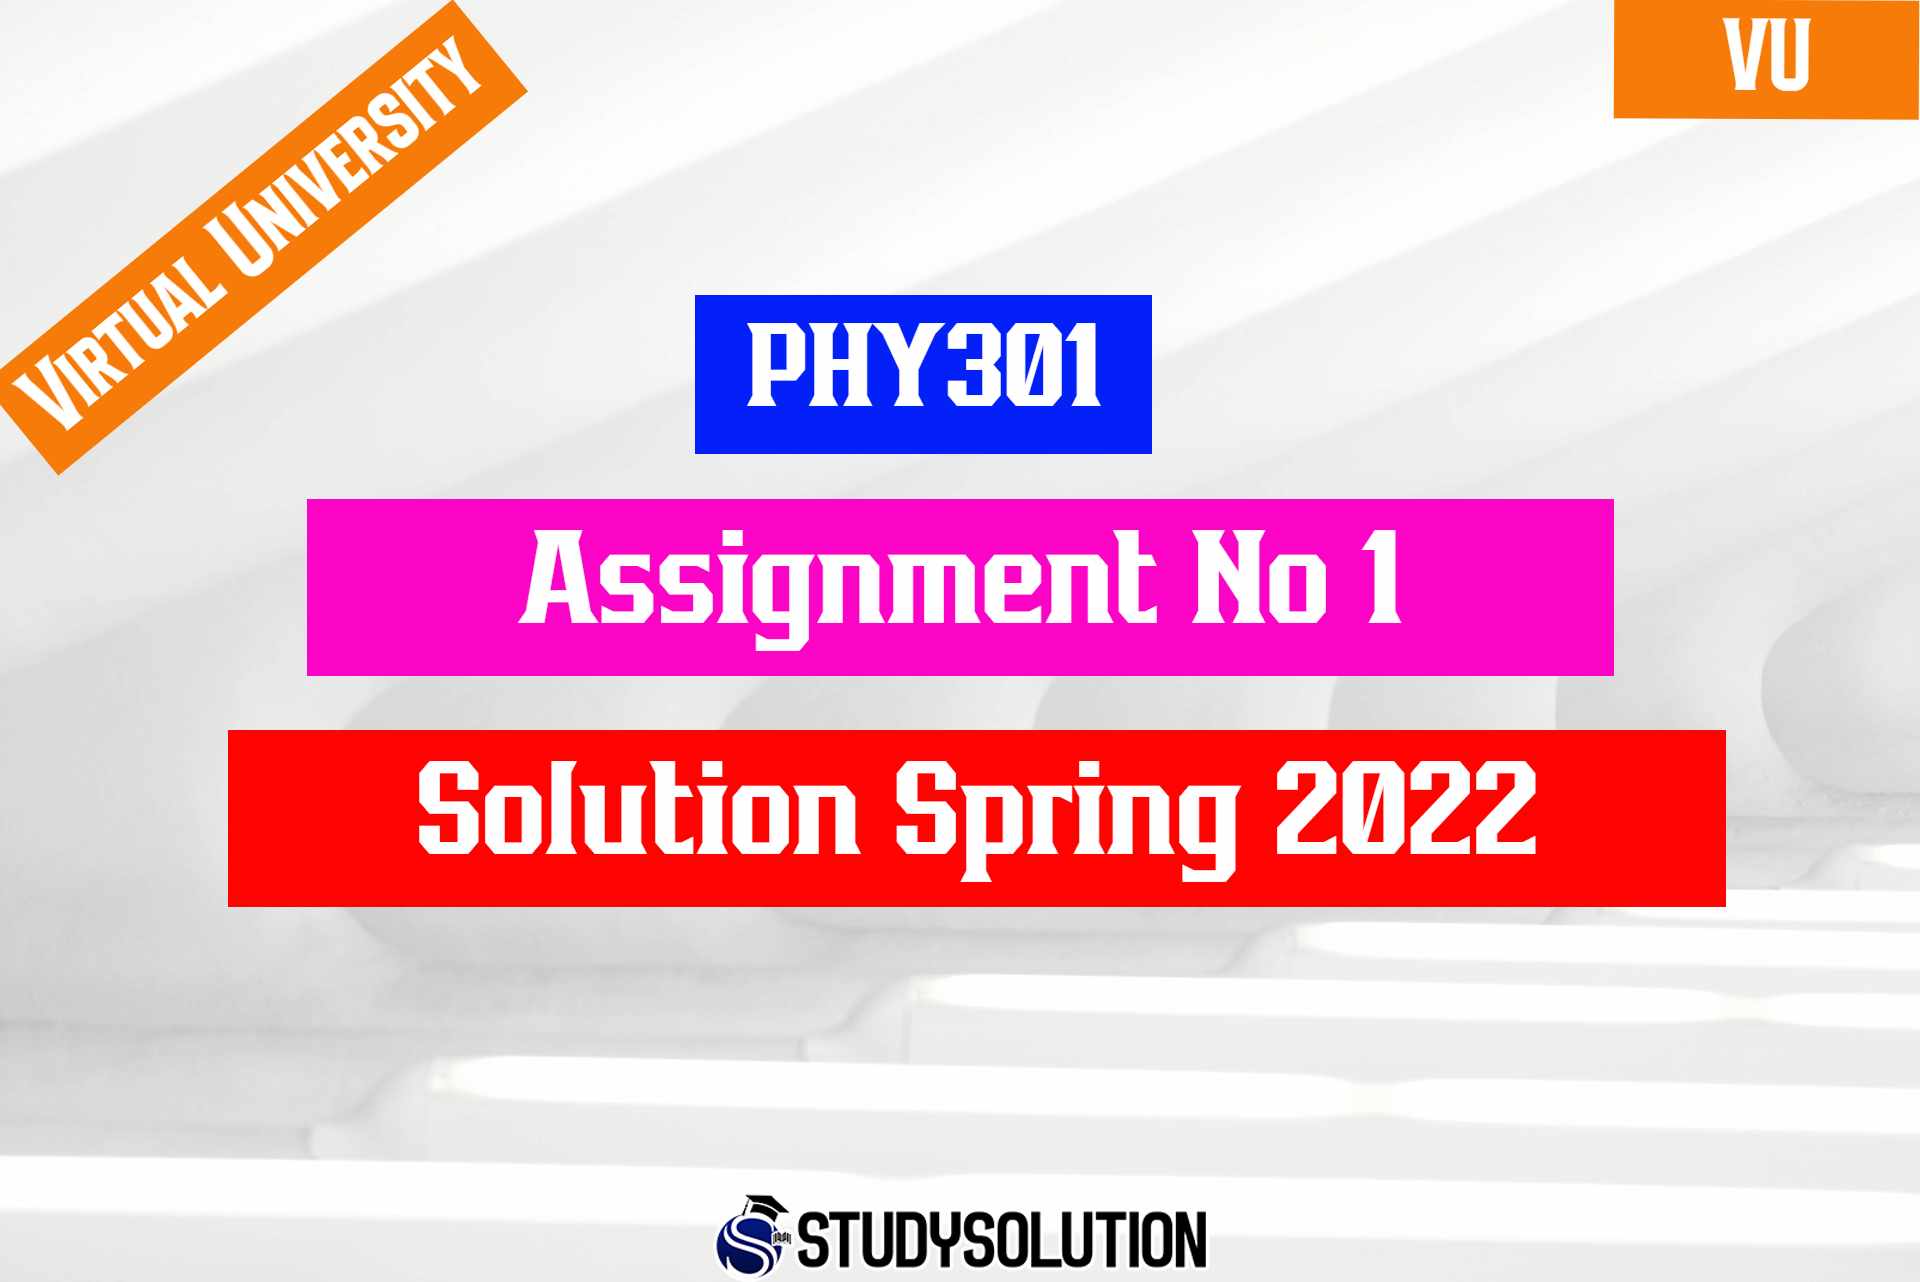 PHY301 Assignment No 1 Solution Spring 2022